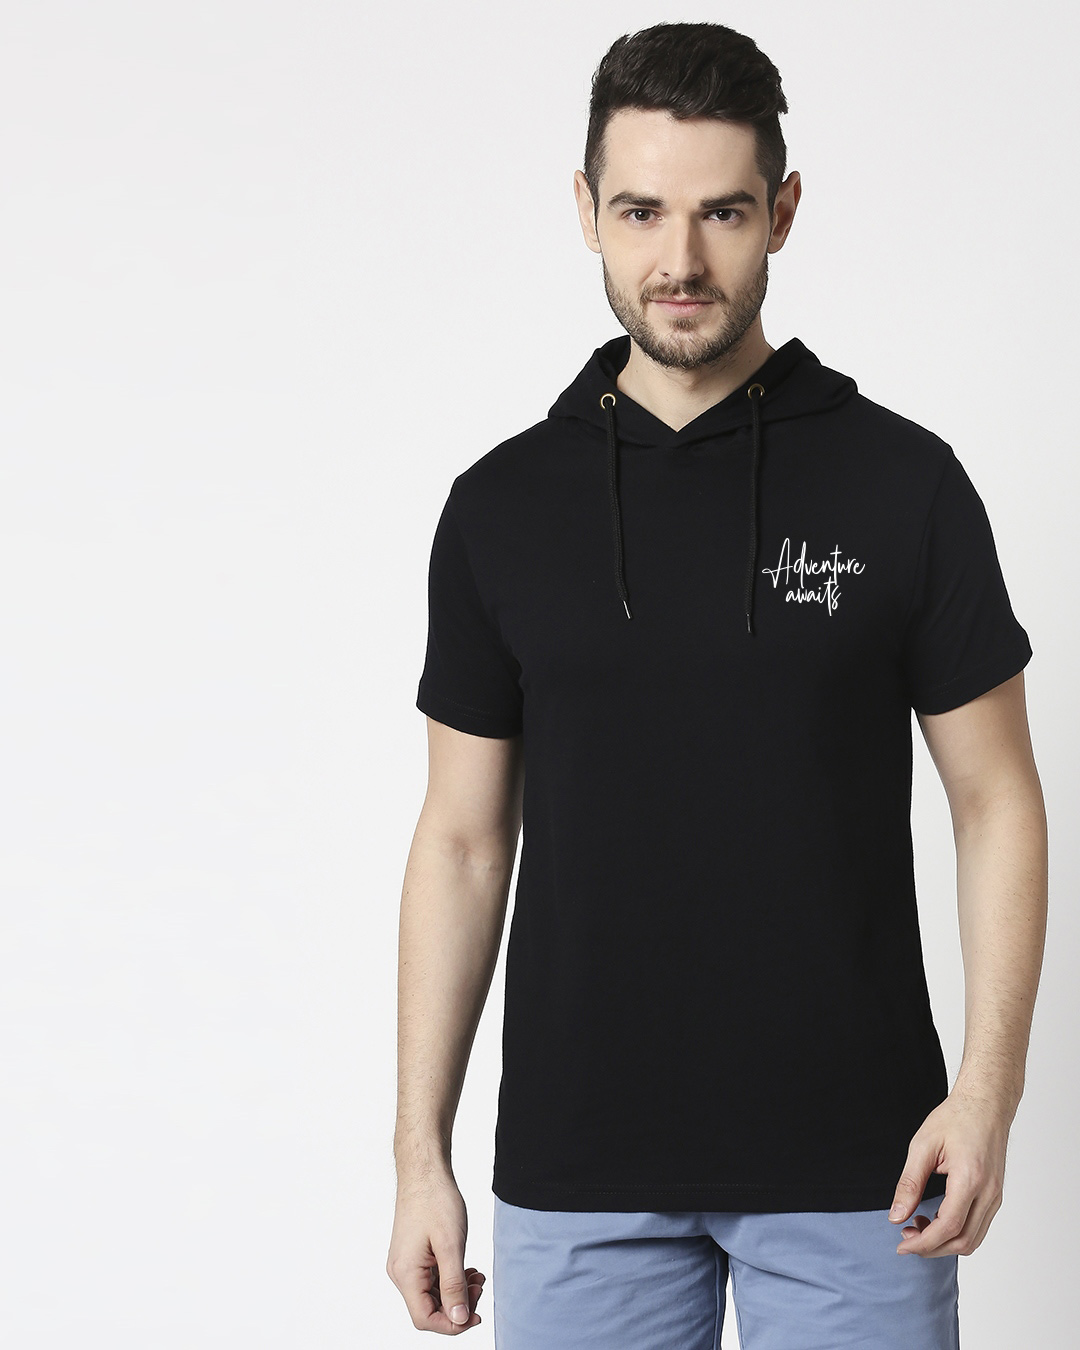 Shop The Best Is Yet To Come Half Sleeve Hoodie T-Shirt Black-Back